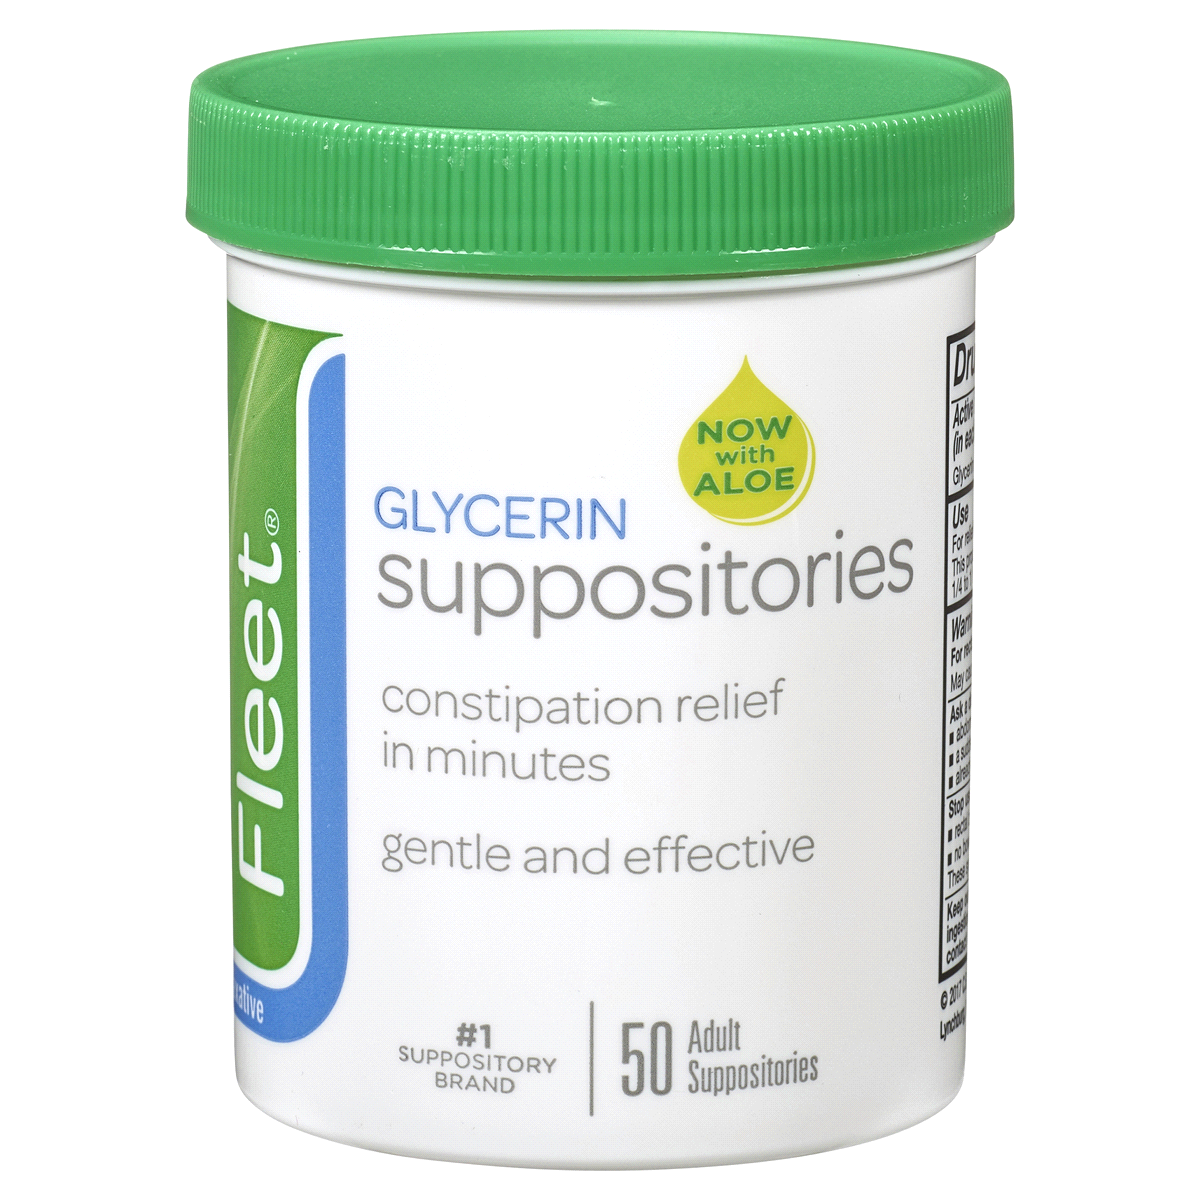 FLEET GLYCERIN SUPPOSITORIES FOR ADULT